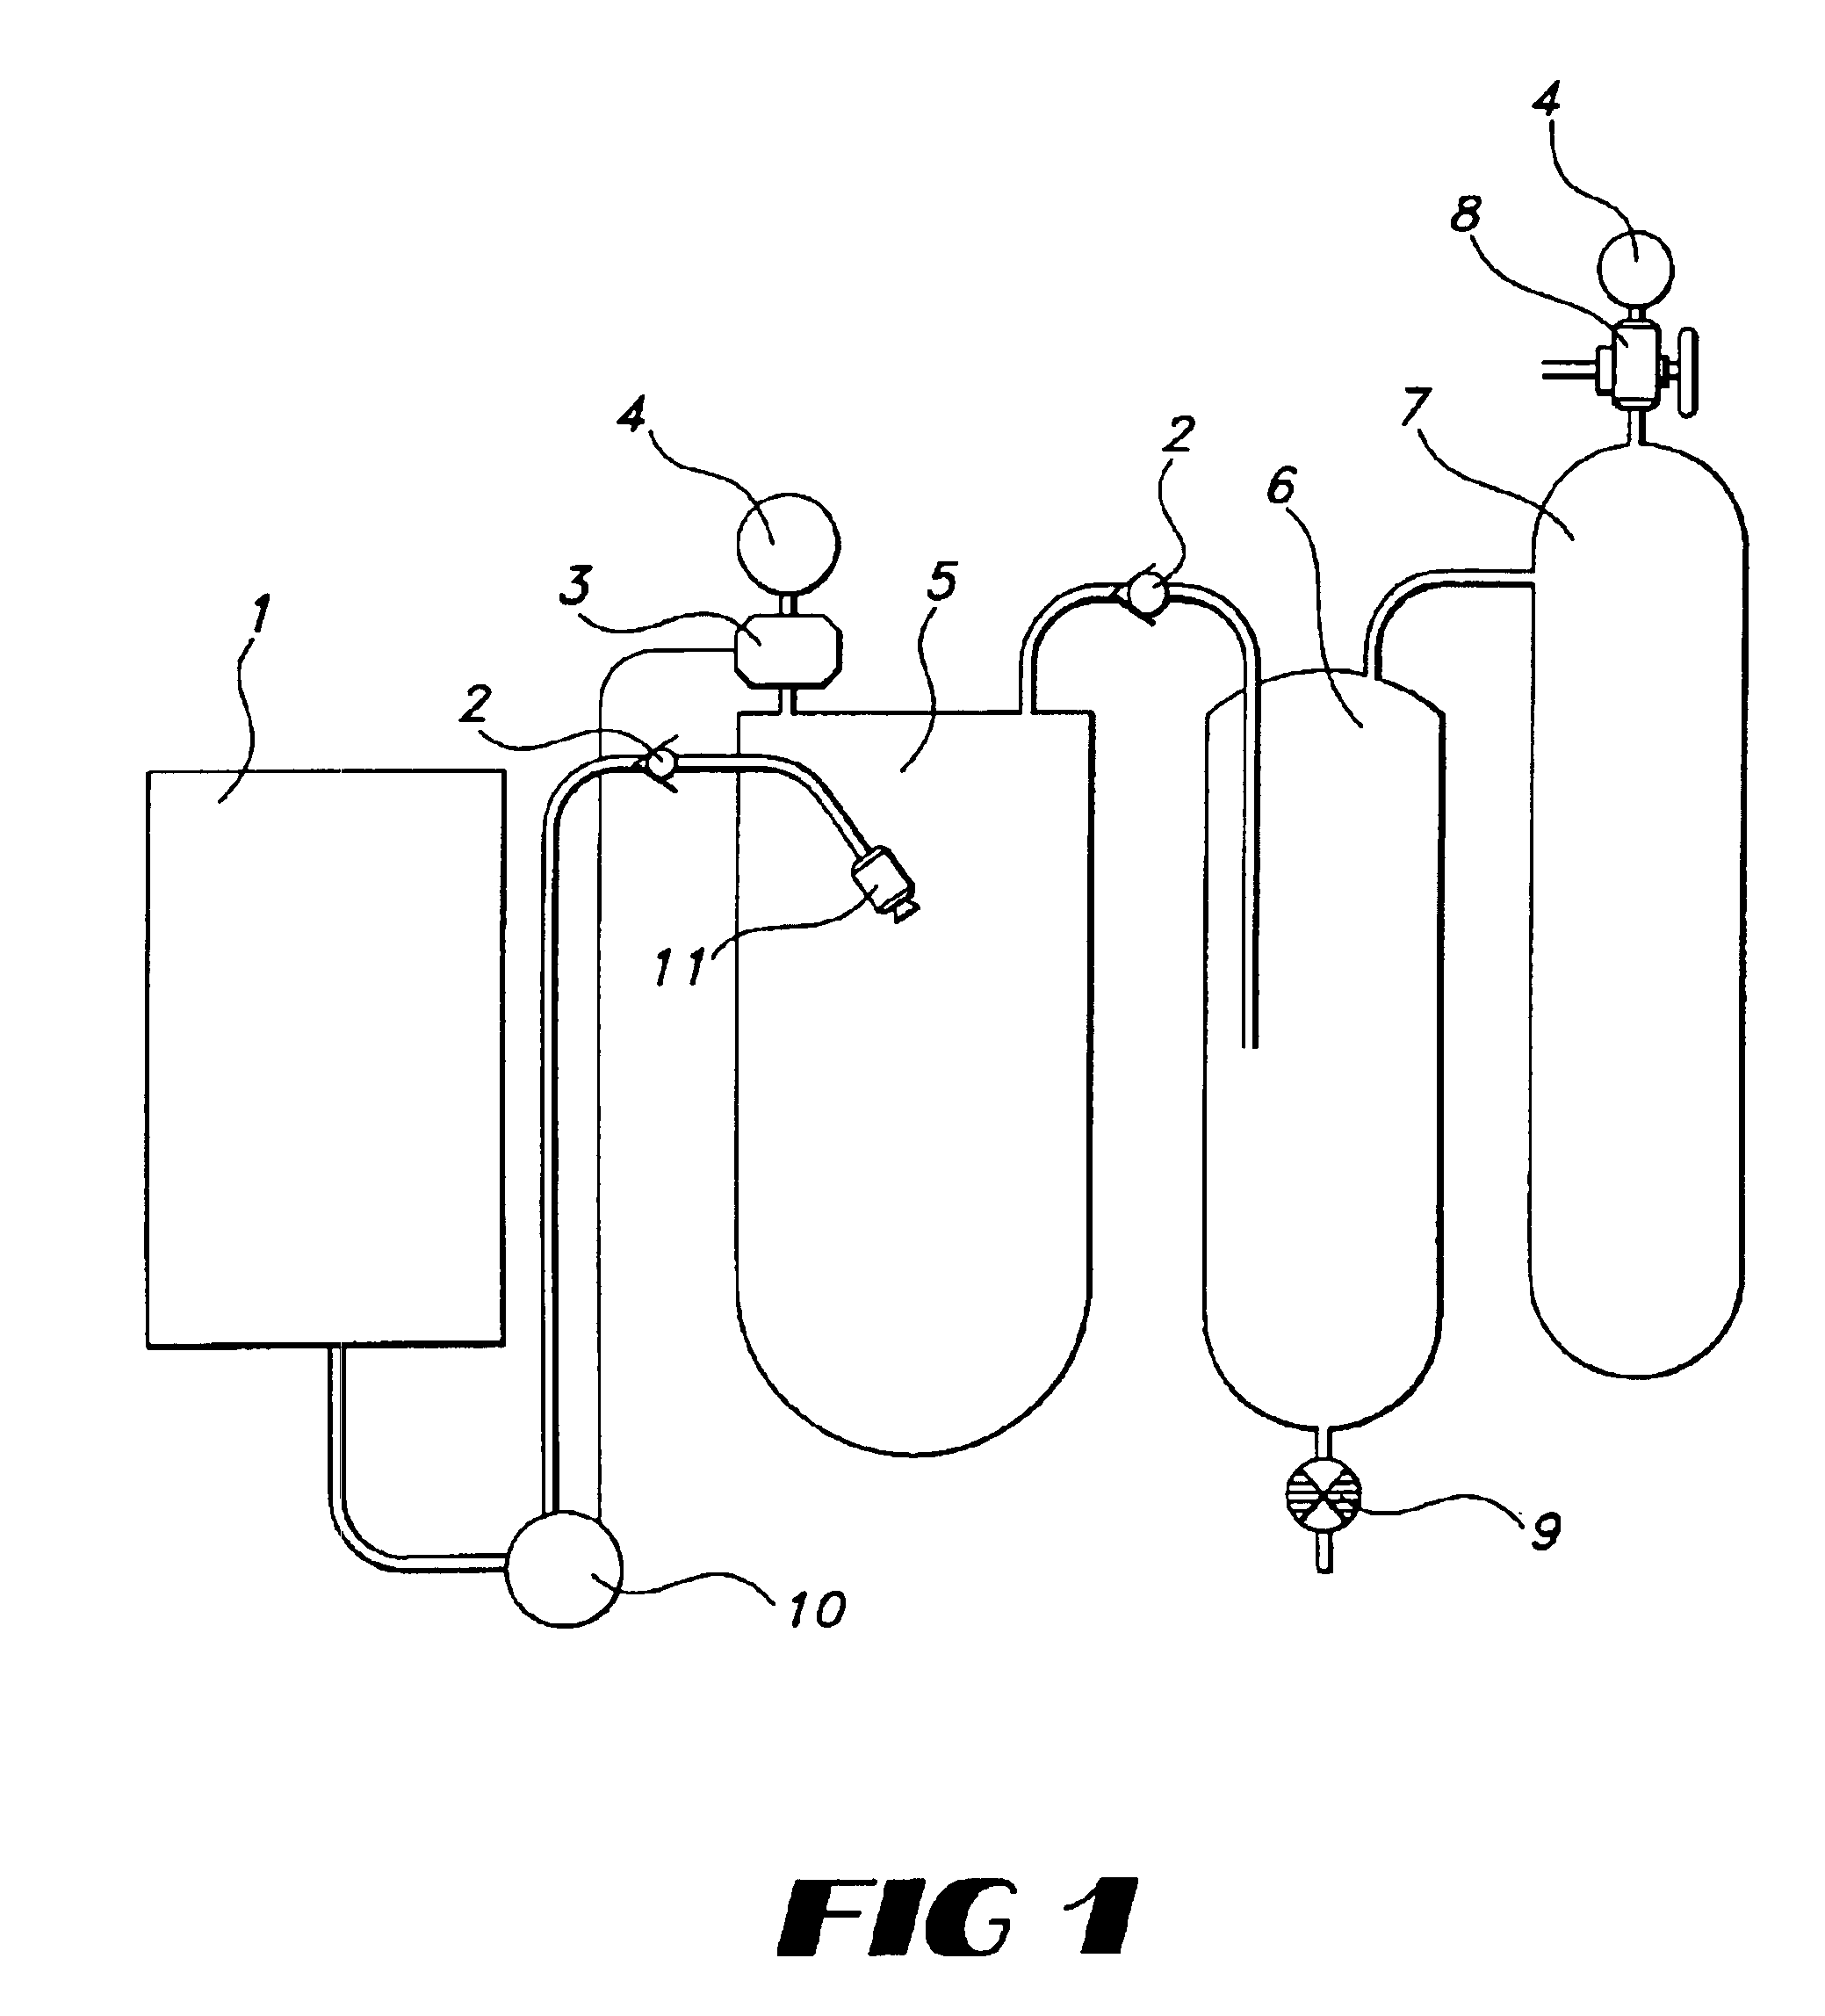 Method for controlled generation of hydrogen by dissociation of water